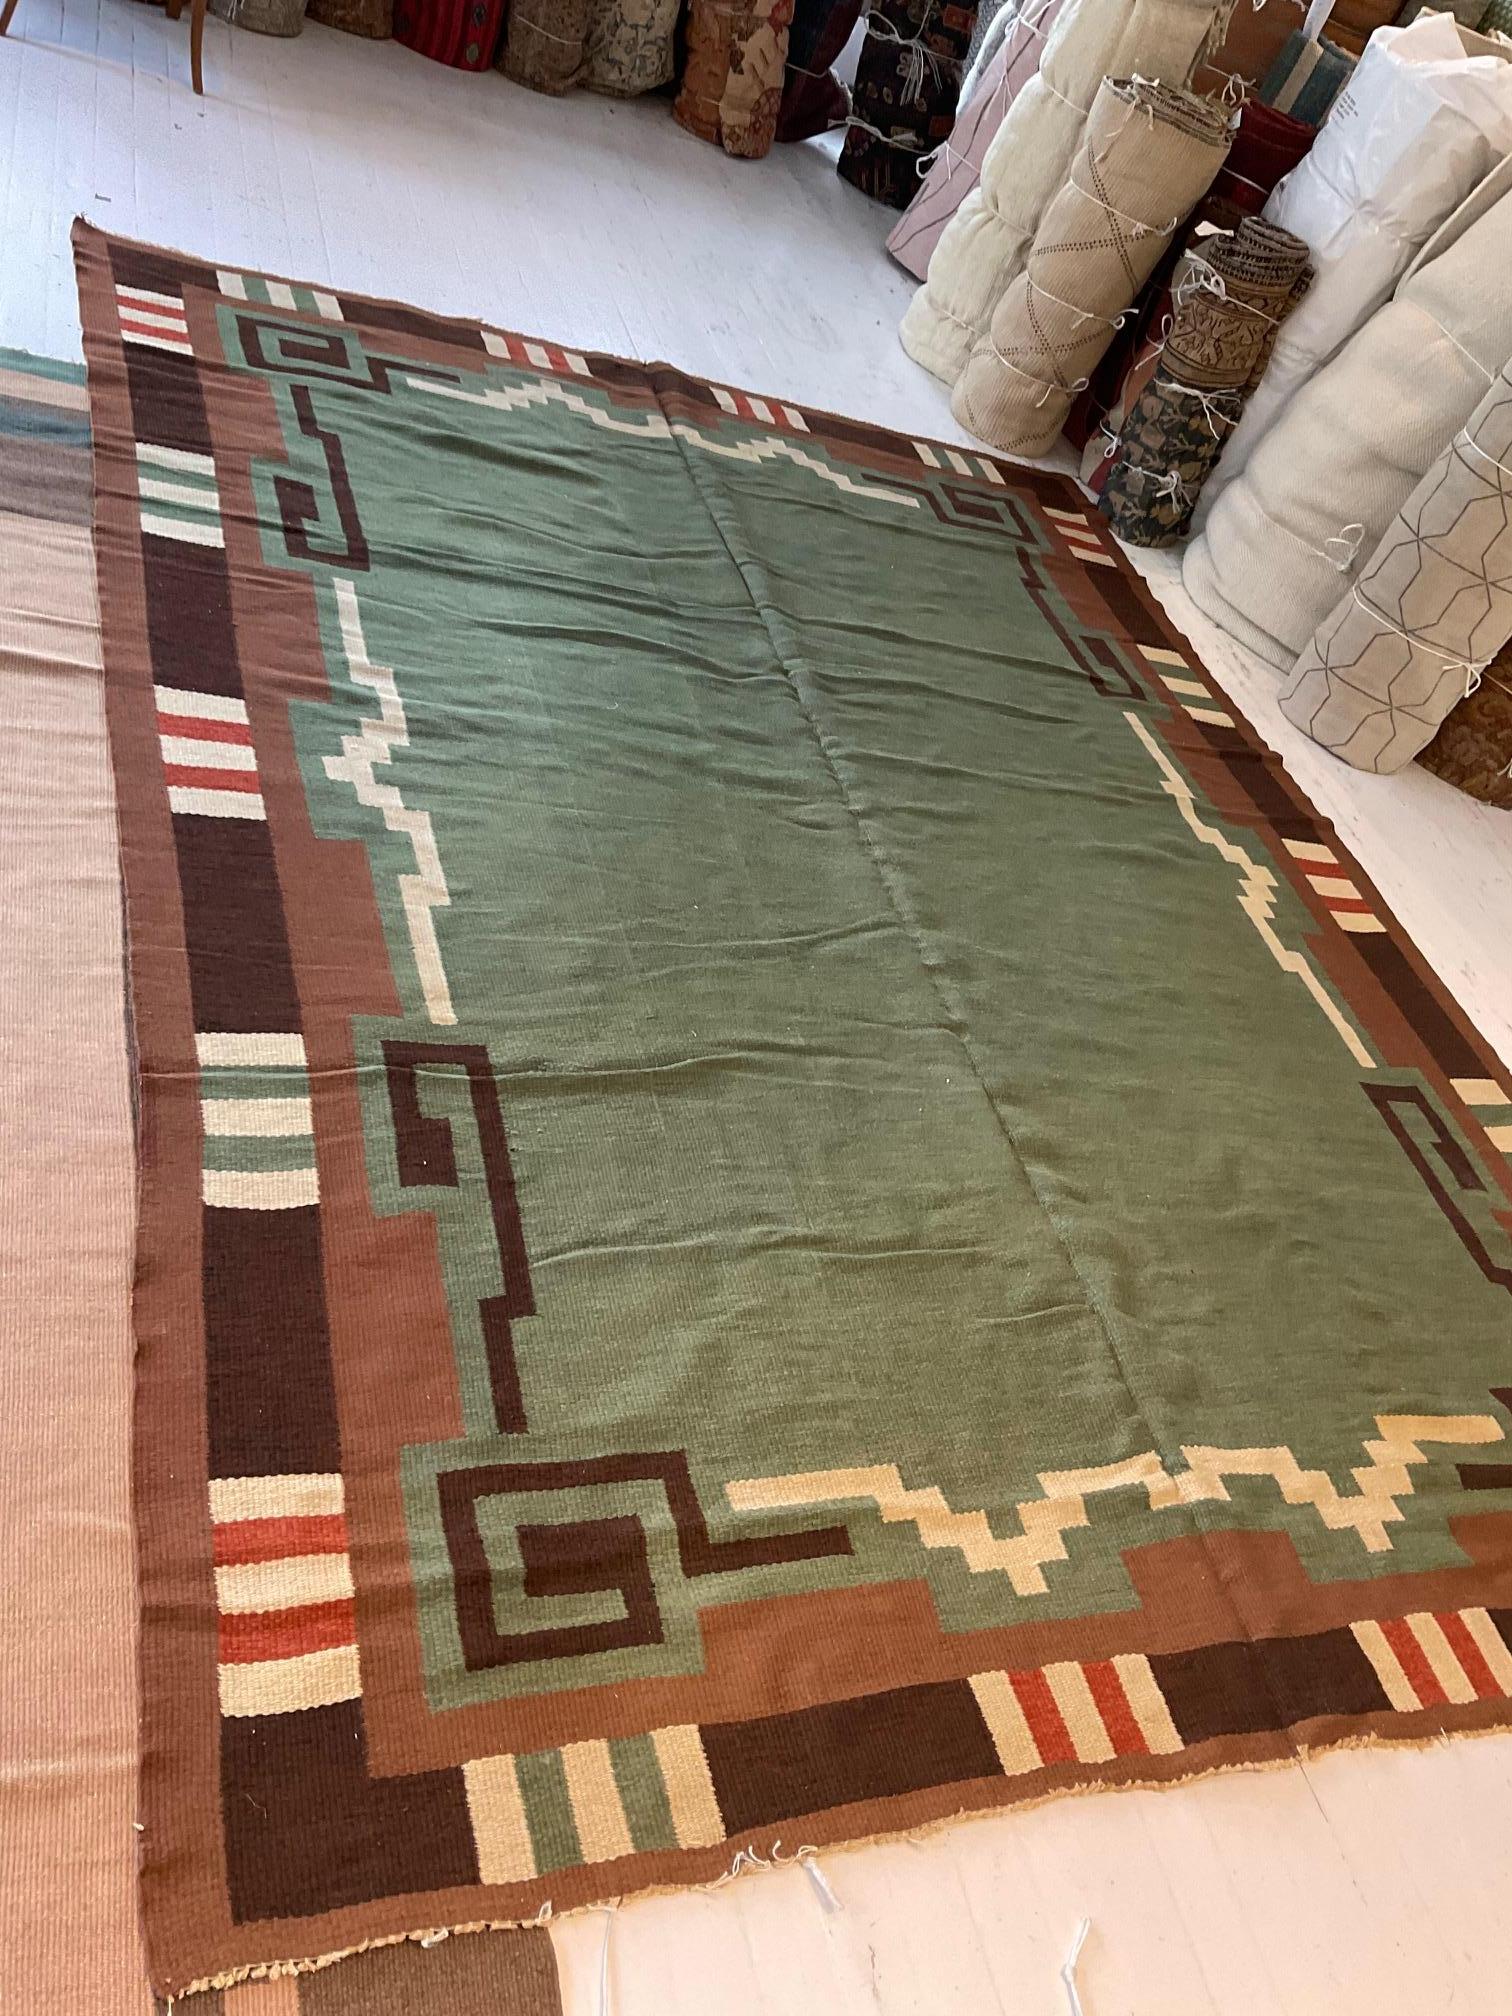 Mid-20th century Swedish Green Hand Knotted Wool Rug
Size: 8'7